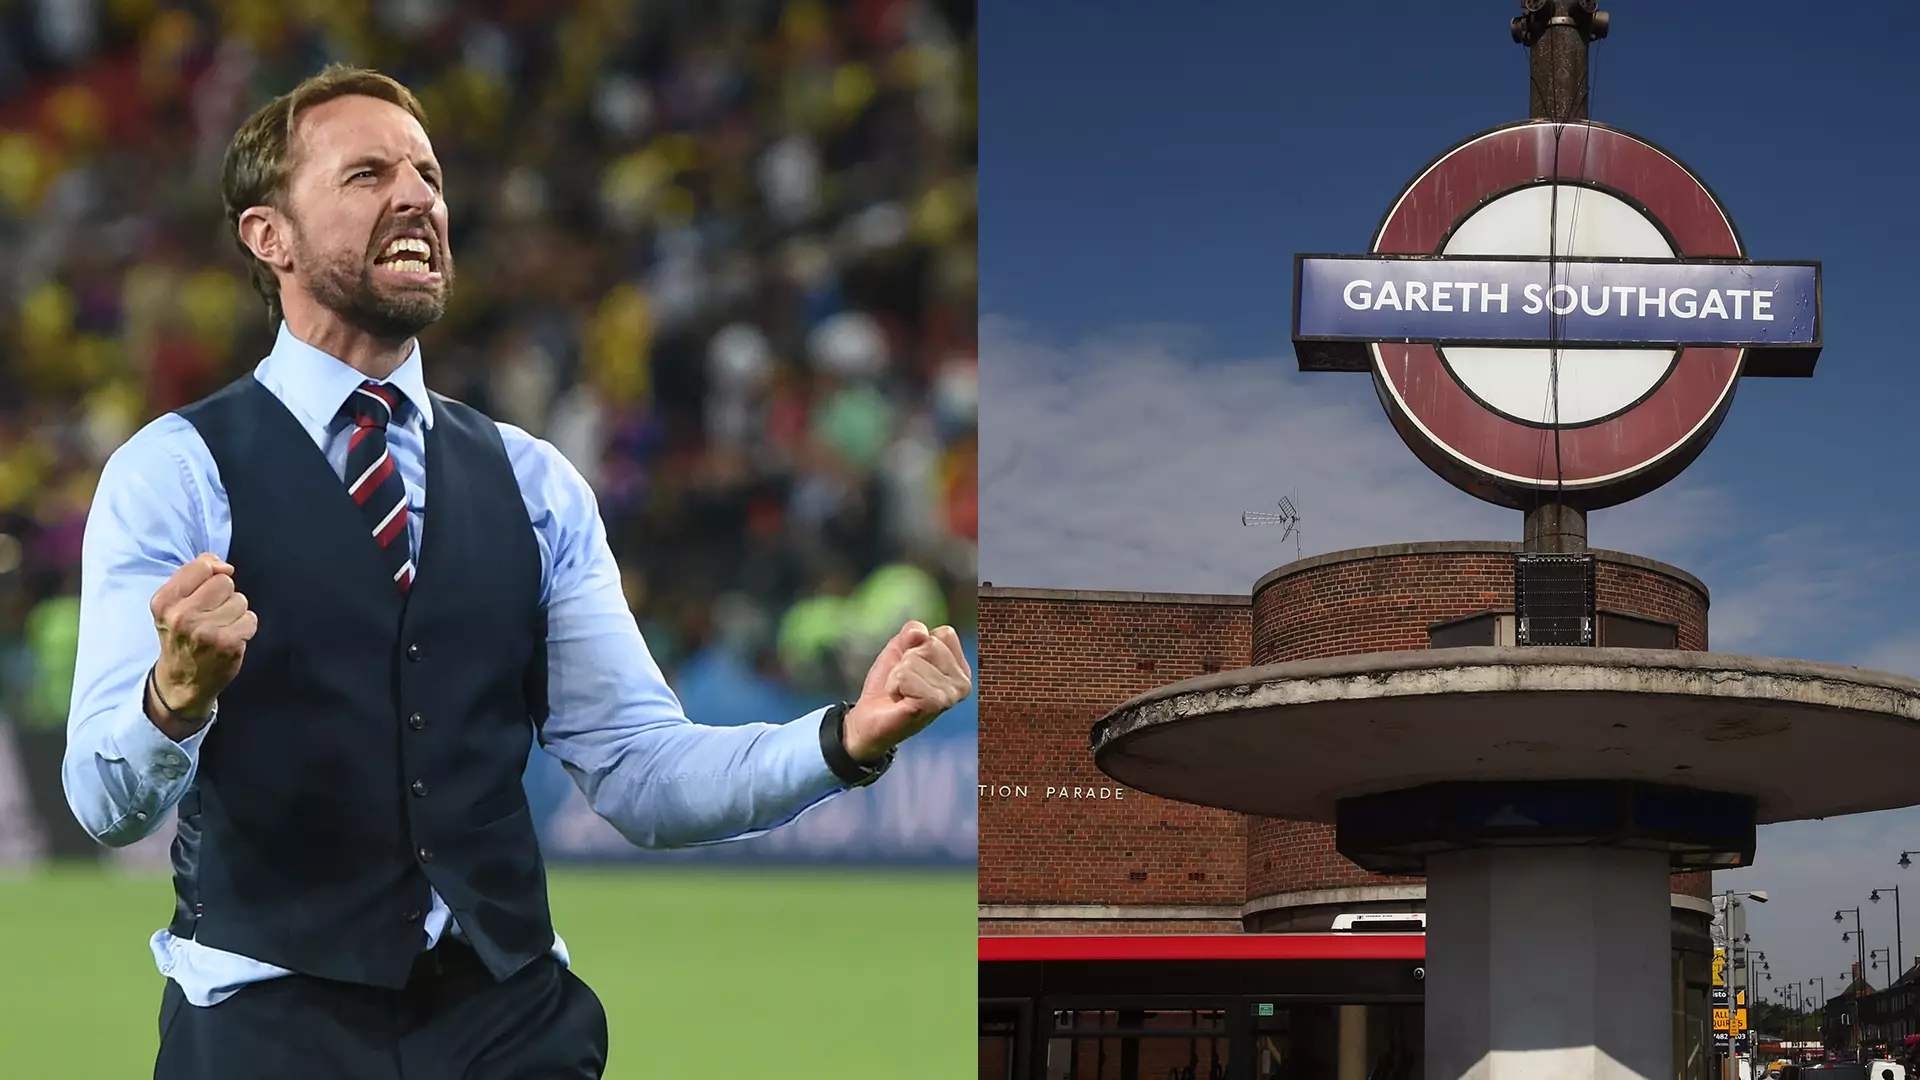 BREAKING NEWS: Gareth Southgate Signs New Contract